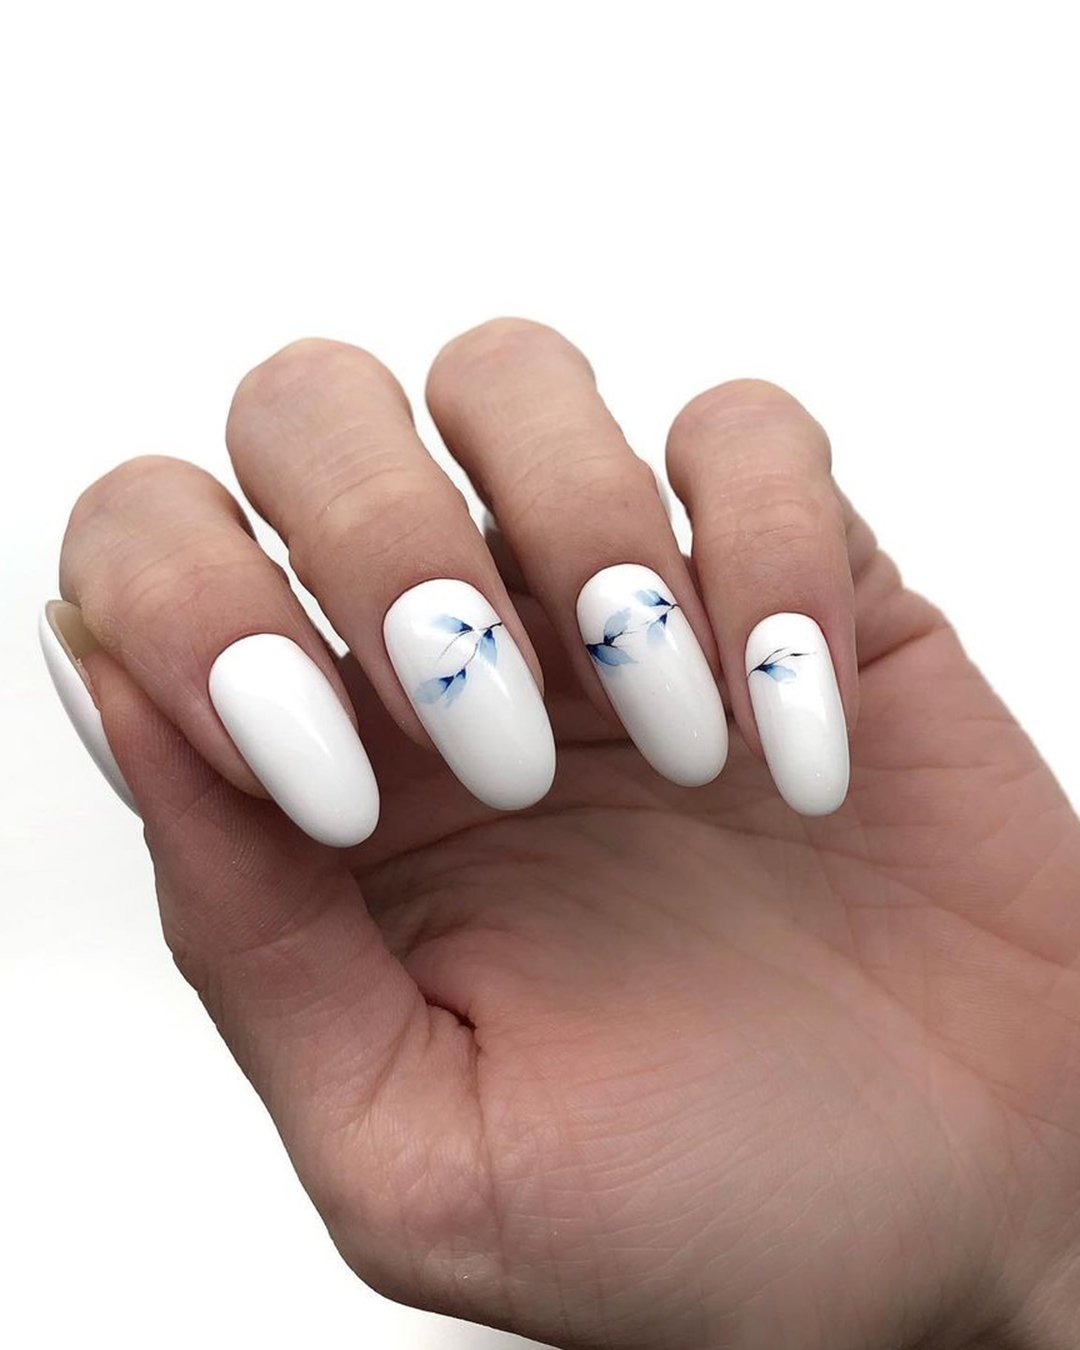 nail design wedding ideas white with blue flowers dudkevich_olga